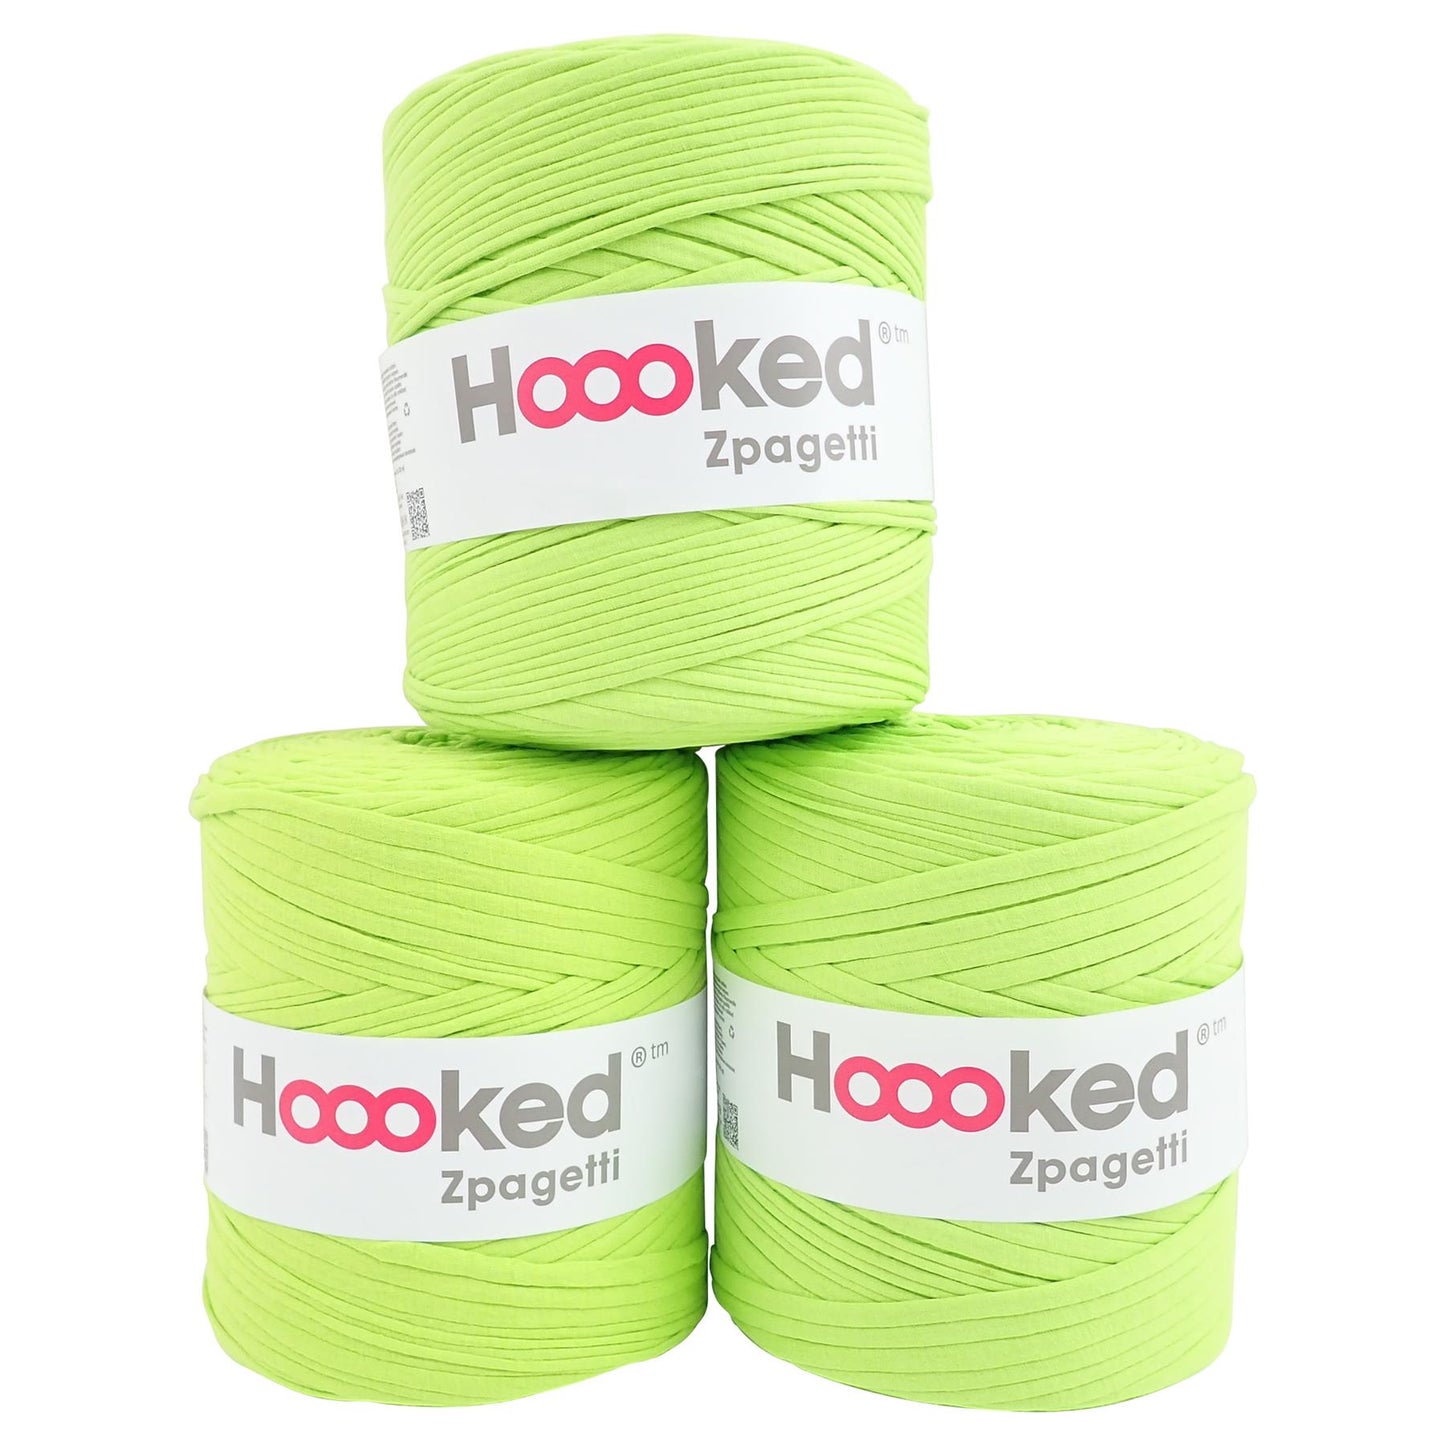 Hoooked Zpagetti Chartreuse Green Cotton T-Shirt Yarn - 120M 700g (Pack of 3)